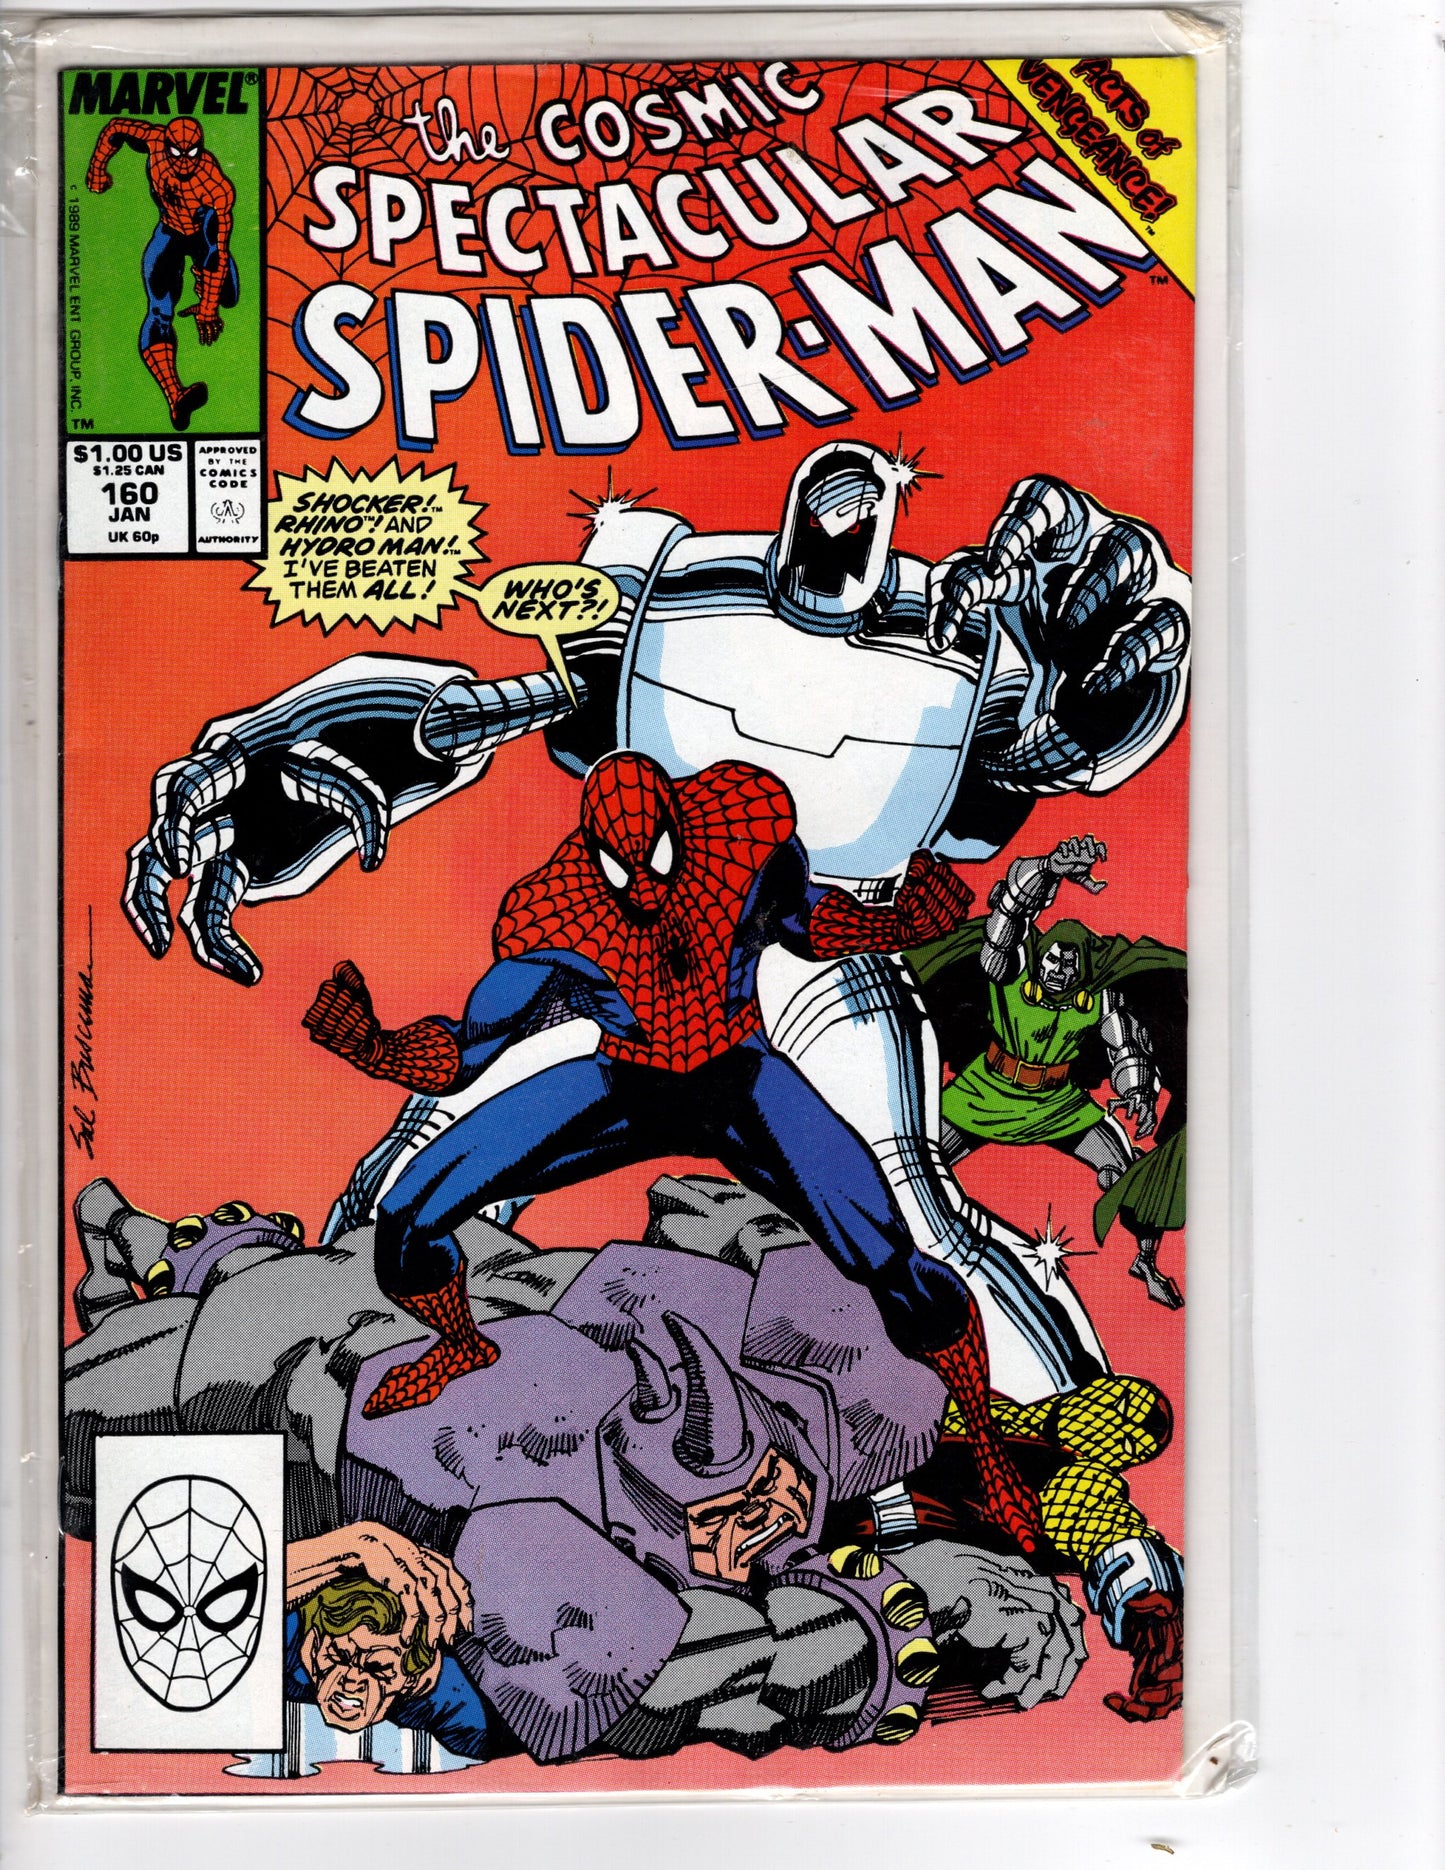 The Spectacular Spider-Man #160